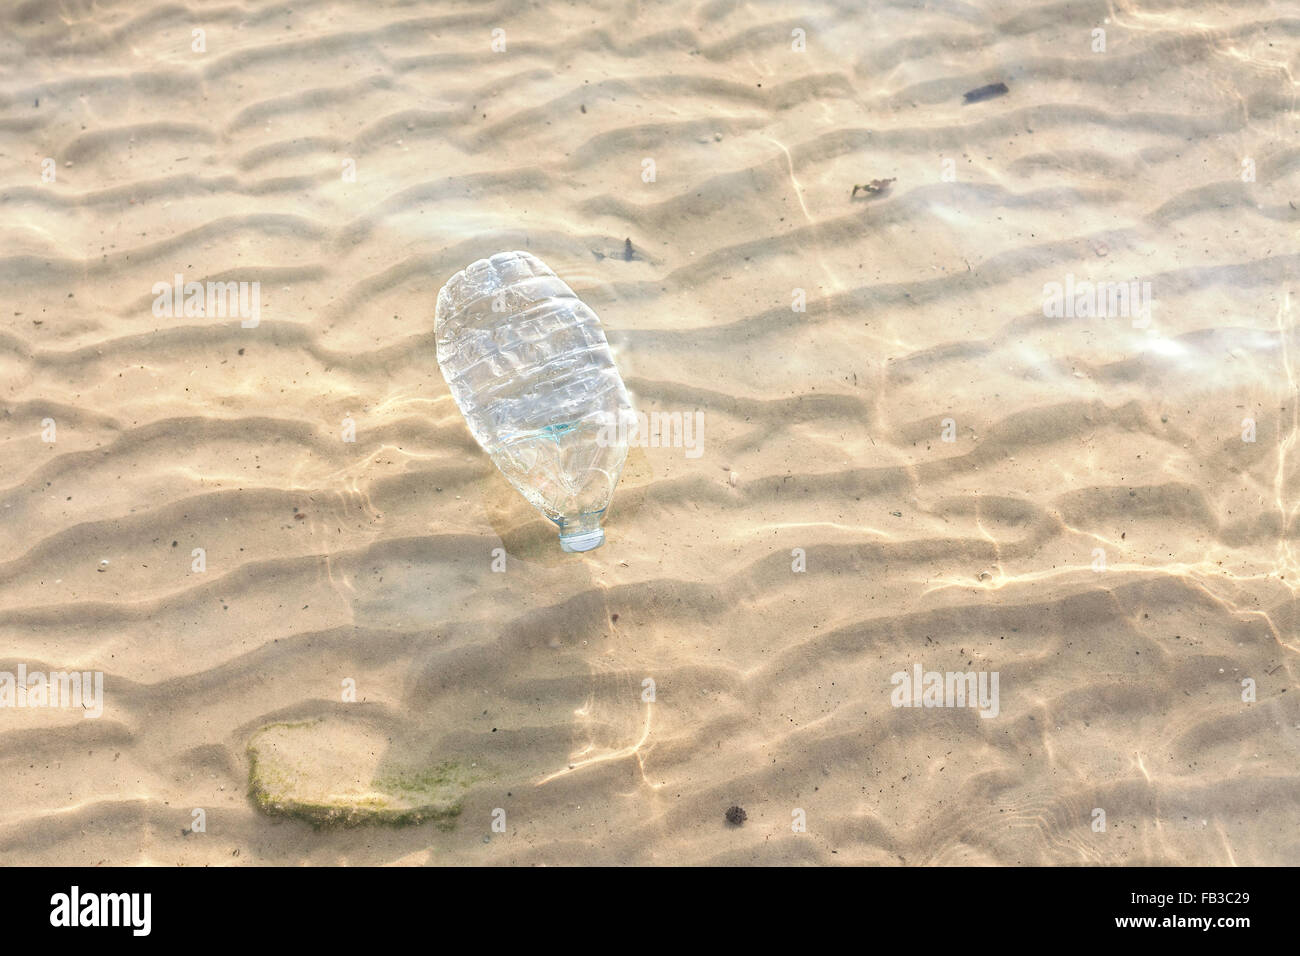 Plastic bottle in shallow sea water, environmental pollution concept. Stock Photo